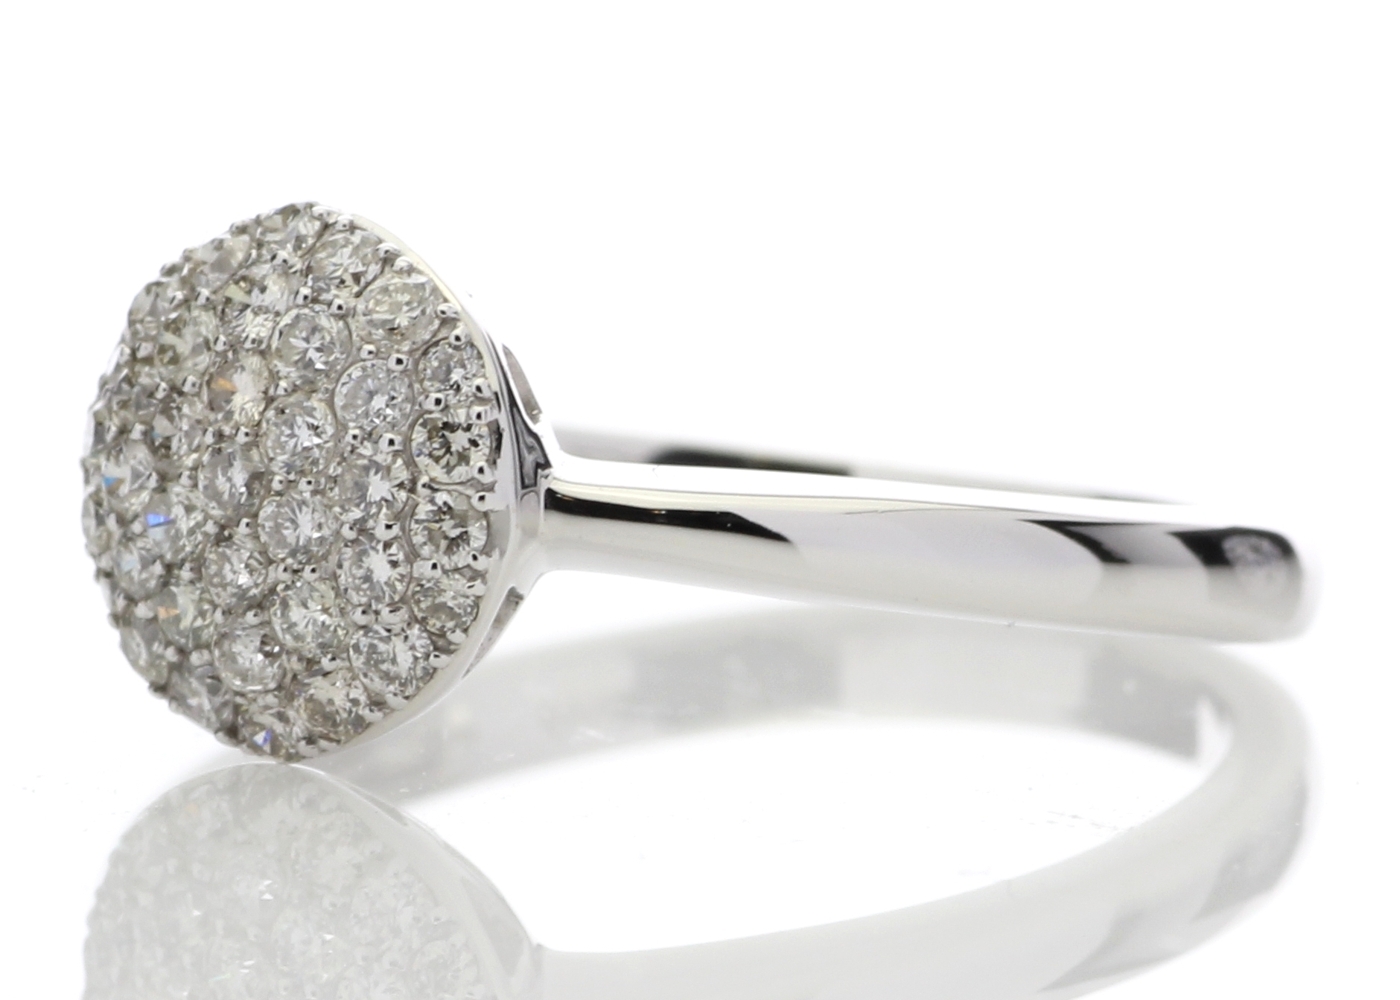 9k White Gold Diamond Cluster Ring 0.51 Carats - Image 2 of 4